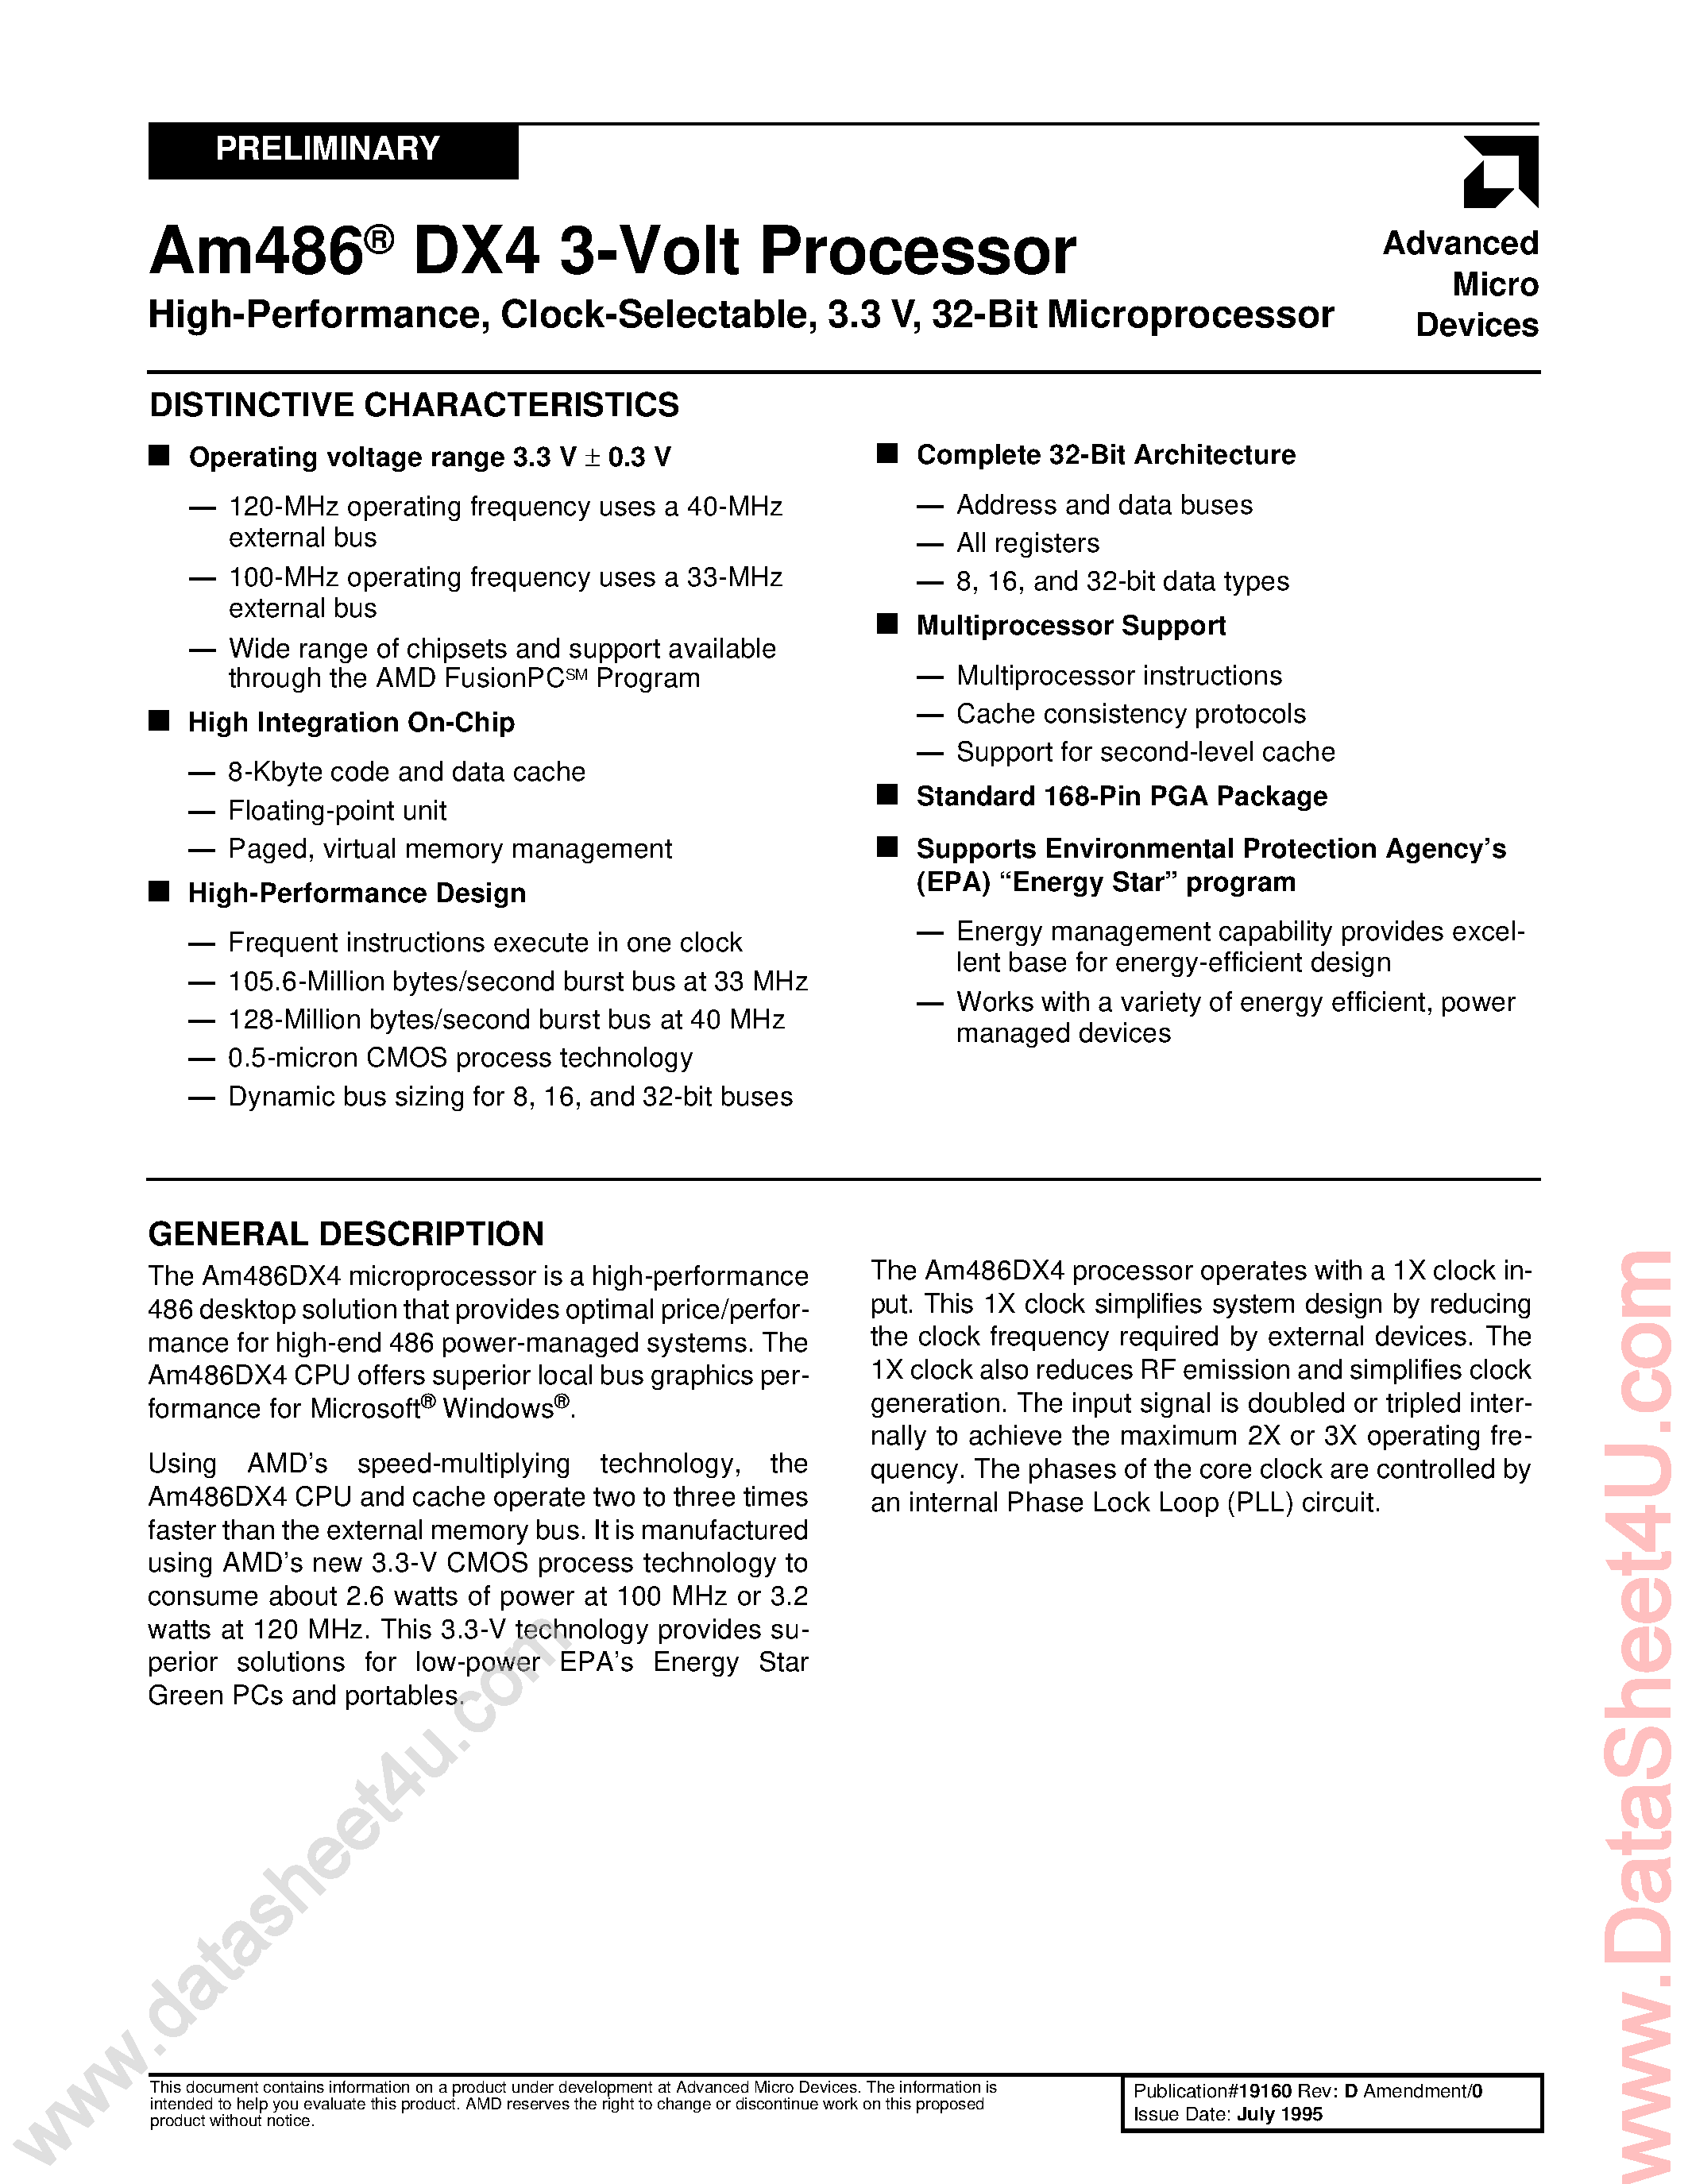 Datasheet AM486DX4 - 3V / Clock-Selectable / 32-Bit Microprocessor page 1